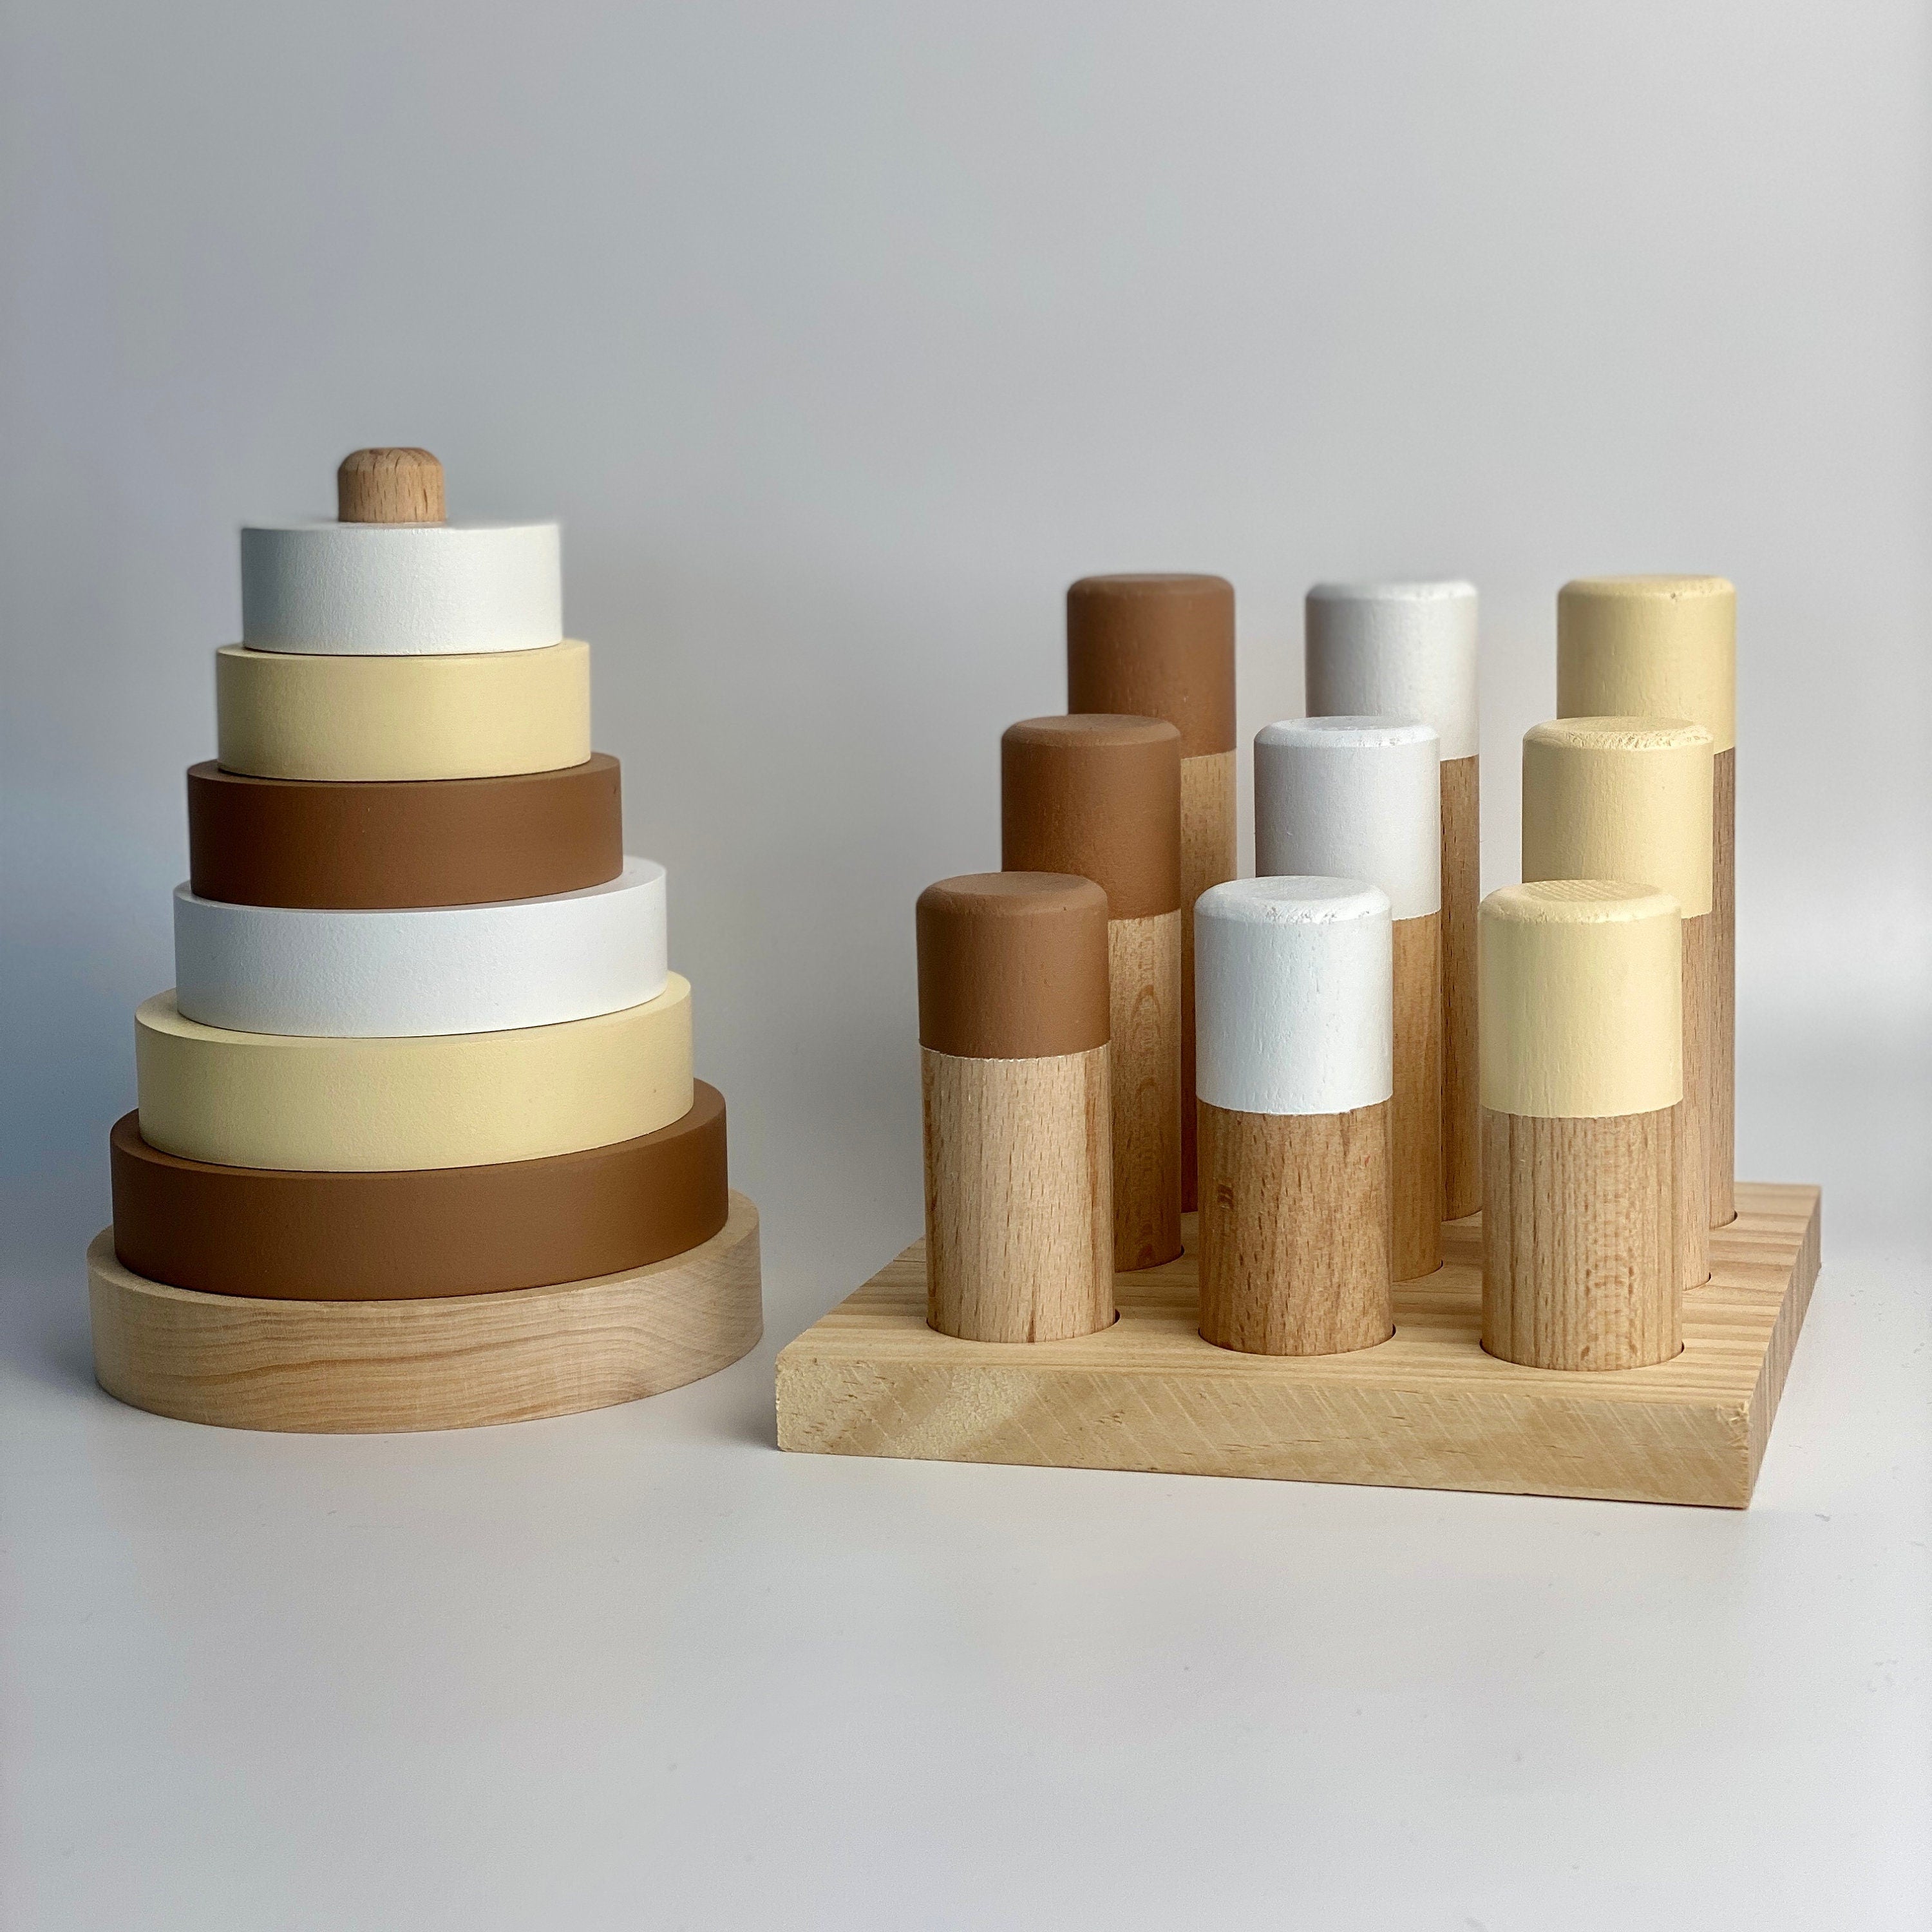 Sand Wooden Stacking Pyramid & Peg Board Sorter